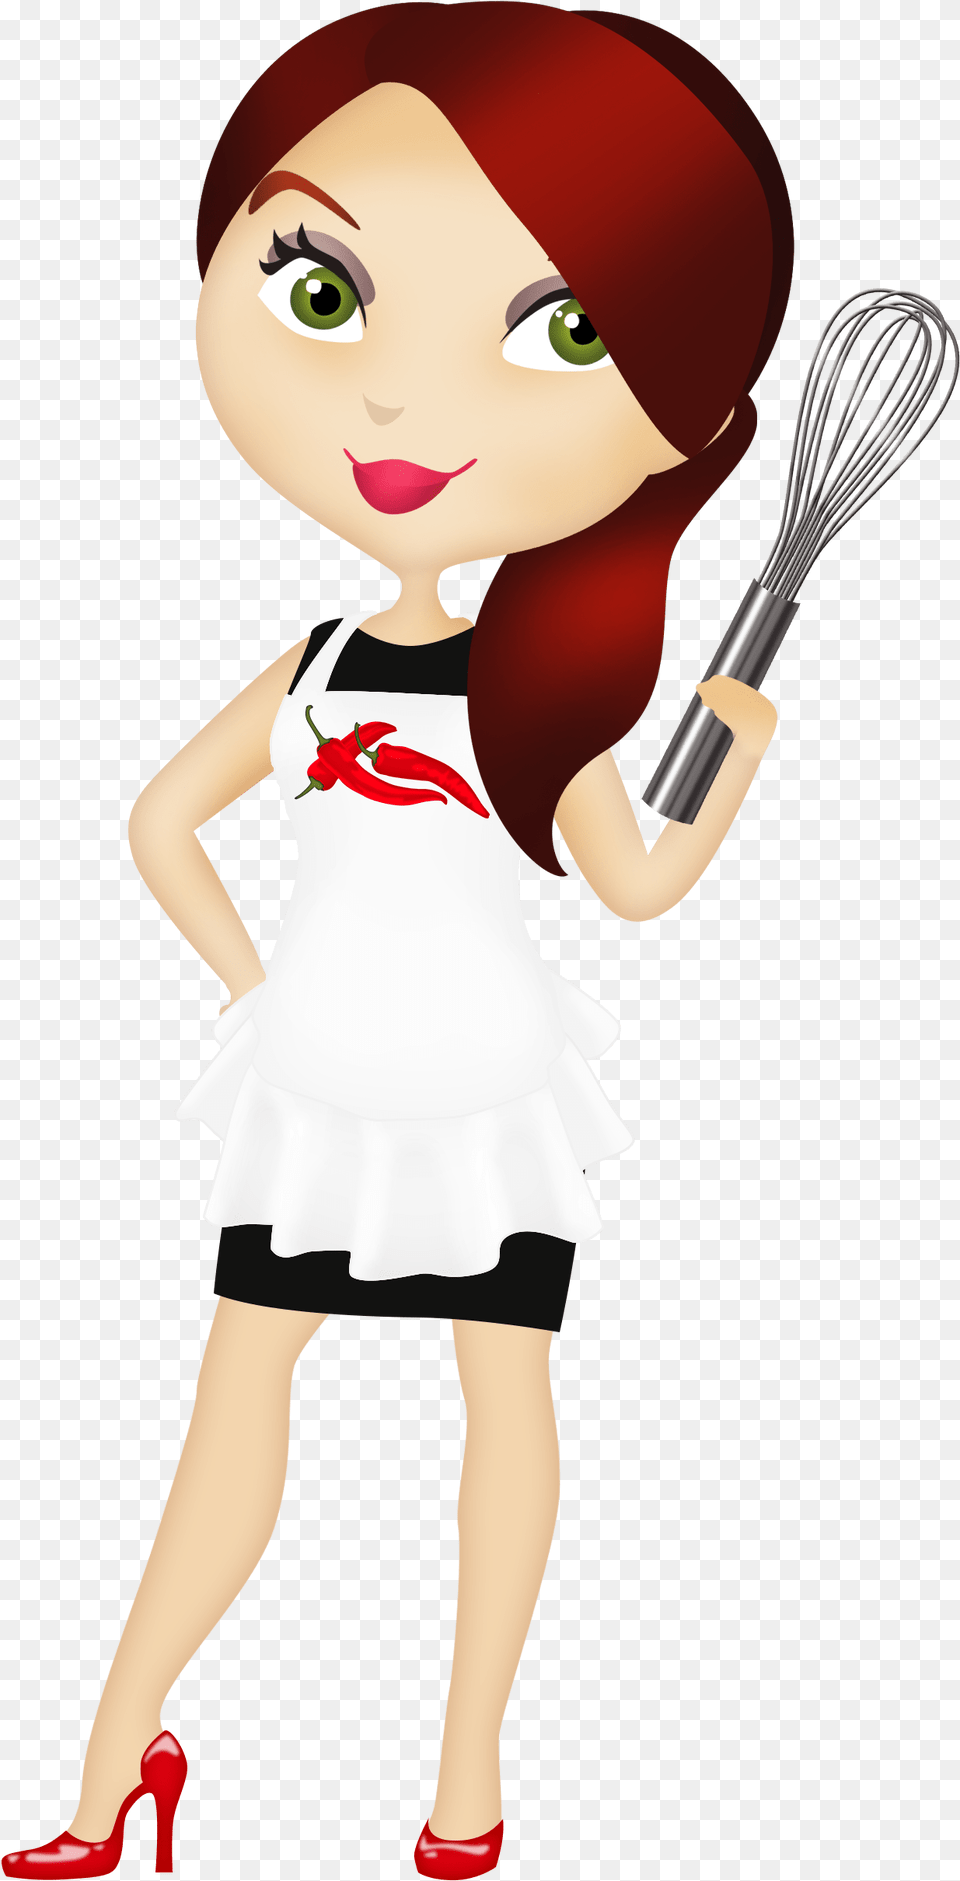 Chef Cartoon Girl Chef, Child, Person, Female, Footwear Png Image